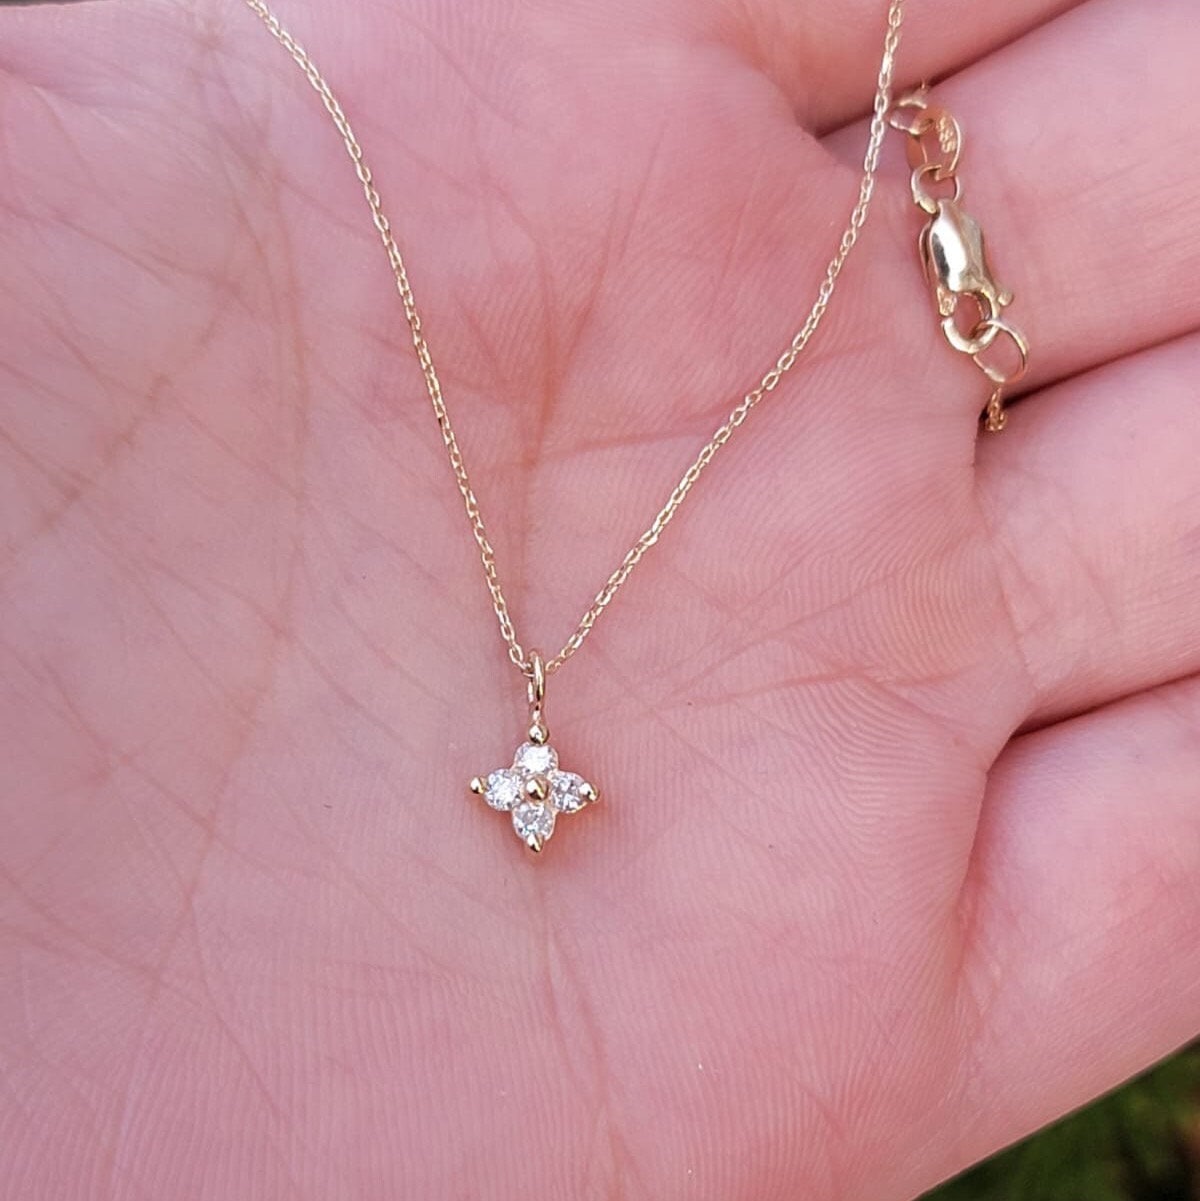 Diamond Clover Necklace in 14k Solid Gold, Good Luck Charm, Dainty Sparkling Chain, Natural Diamond Flower Cluster Chain, White Gold pendant